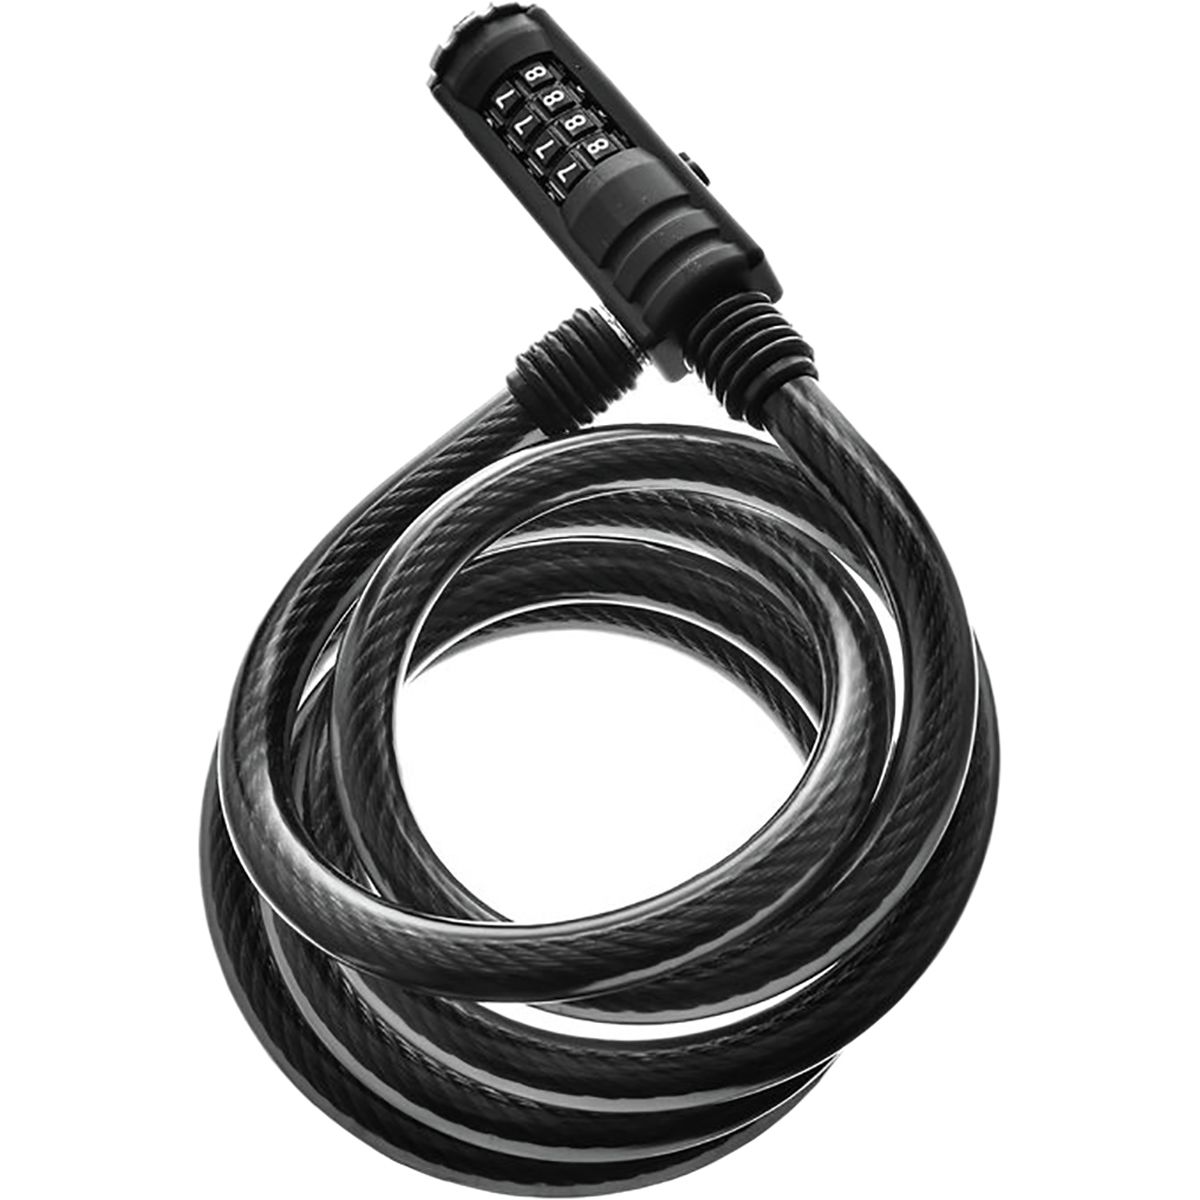 RockyMounts Lester Combo Cable Lock Black, One Size